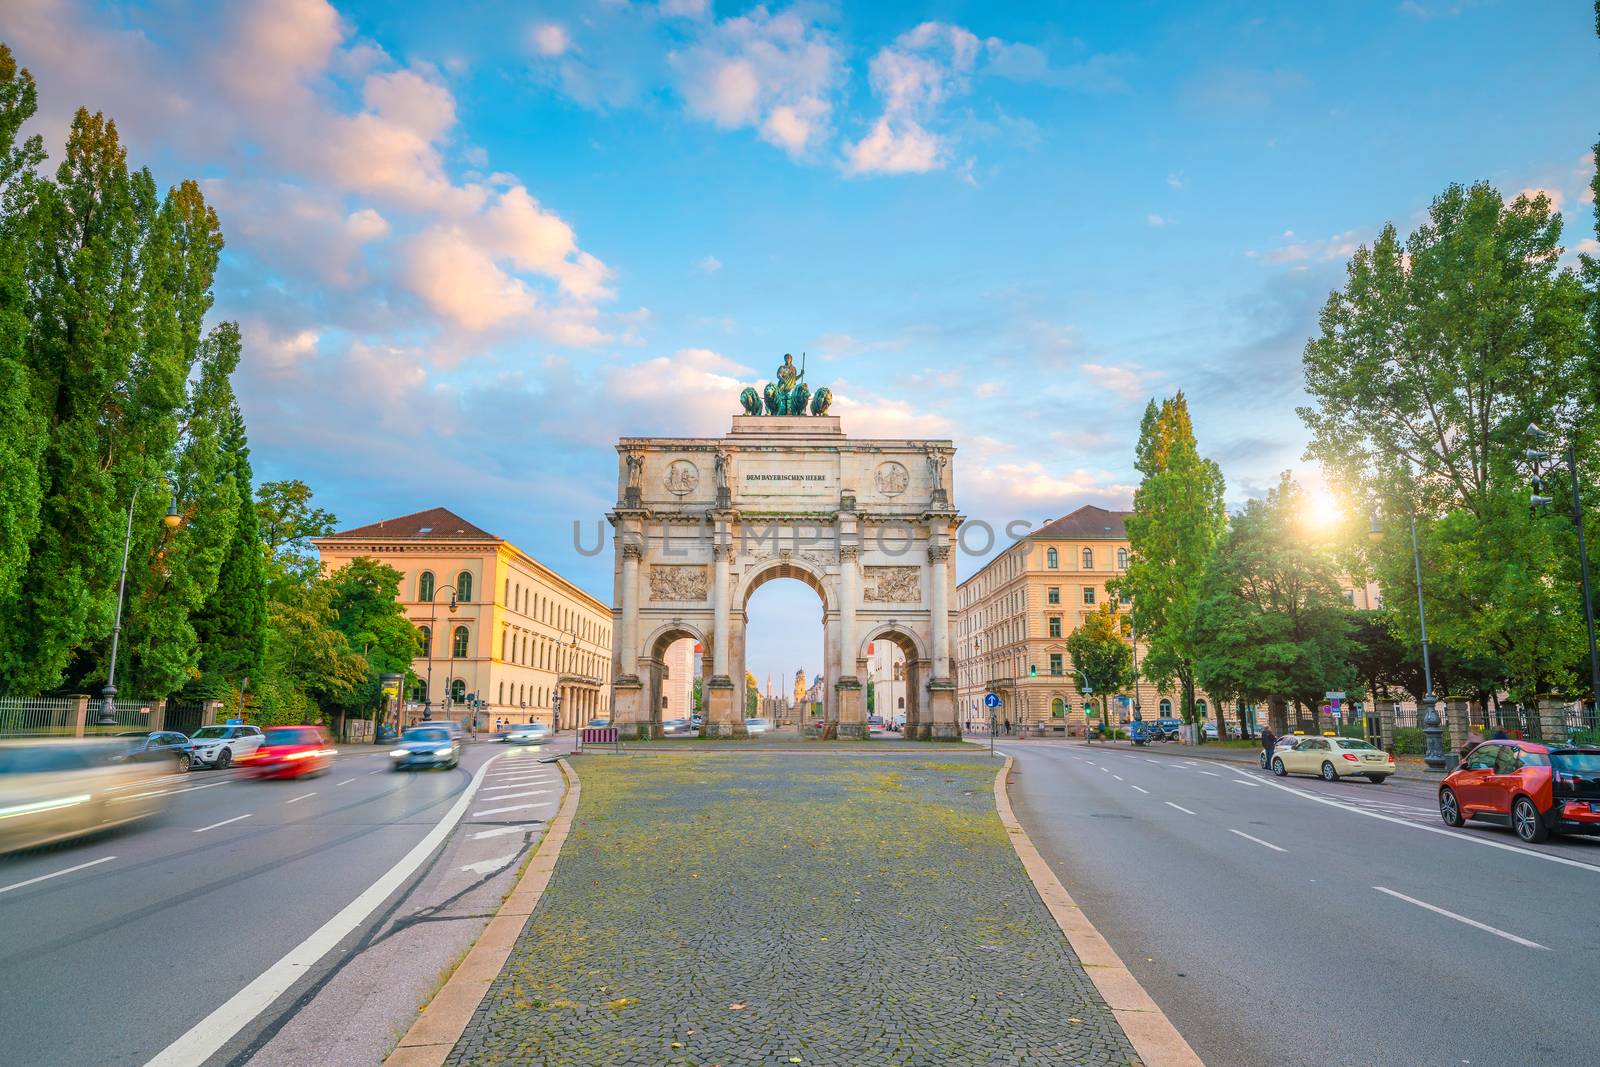 Siegestor  triumphal arch, Munich, Germany (Text on the gate mea by f11photo